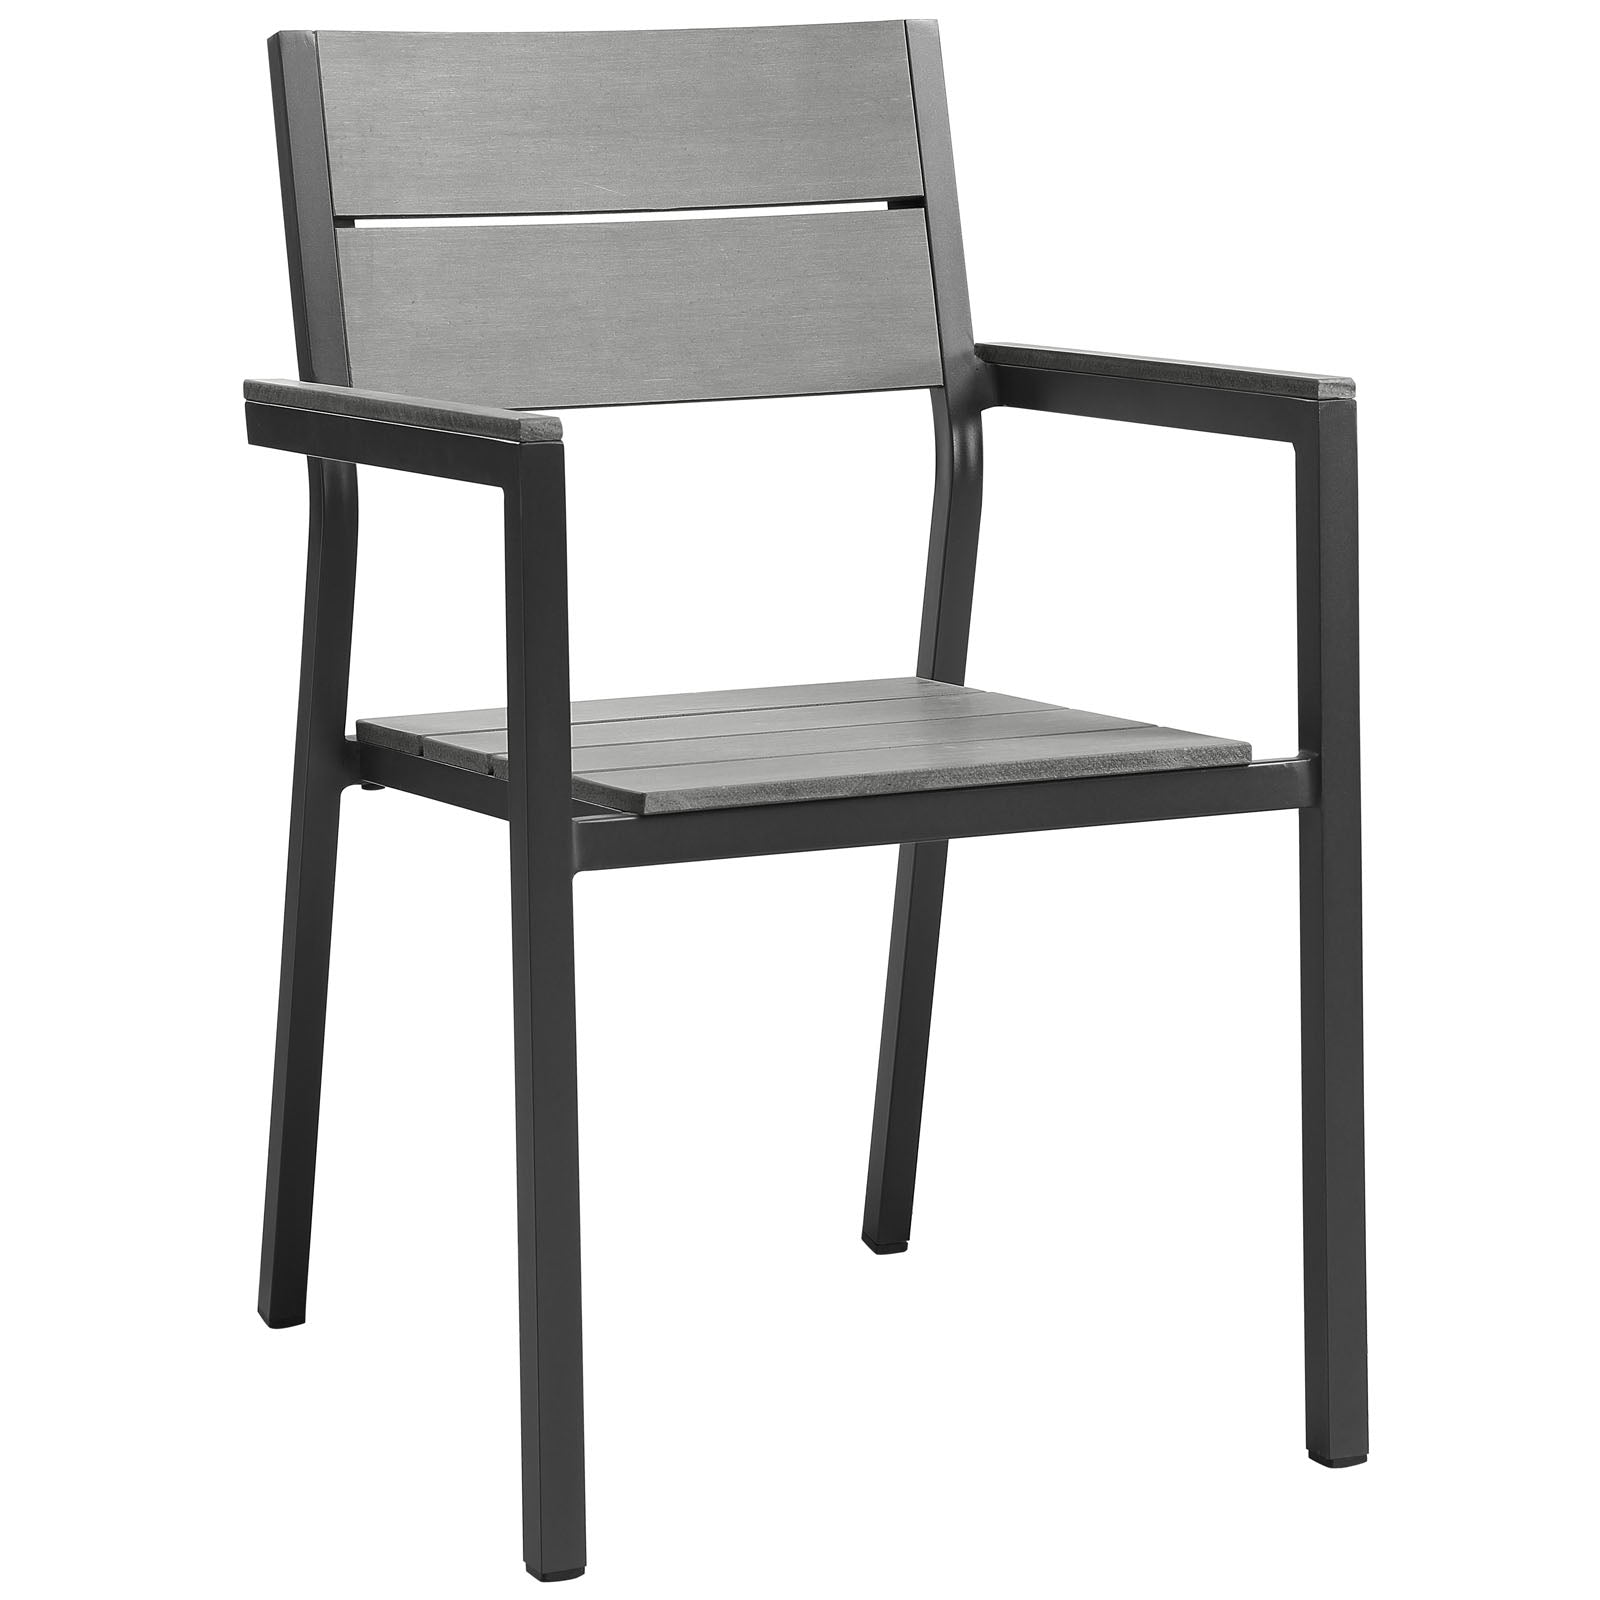 Maine Dining Armchair Outdoor Patio Set of 2